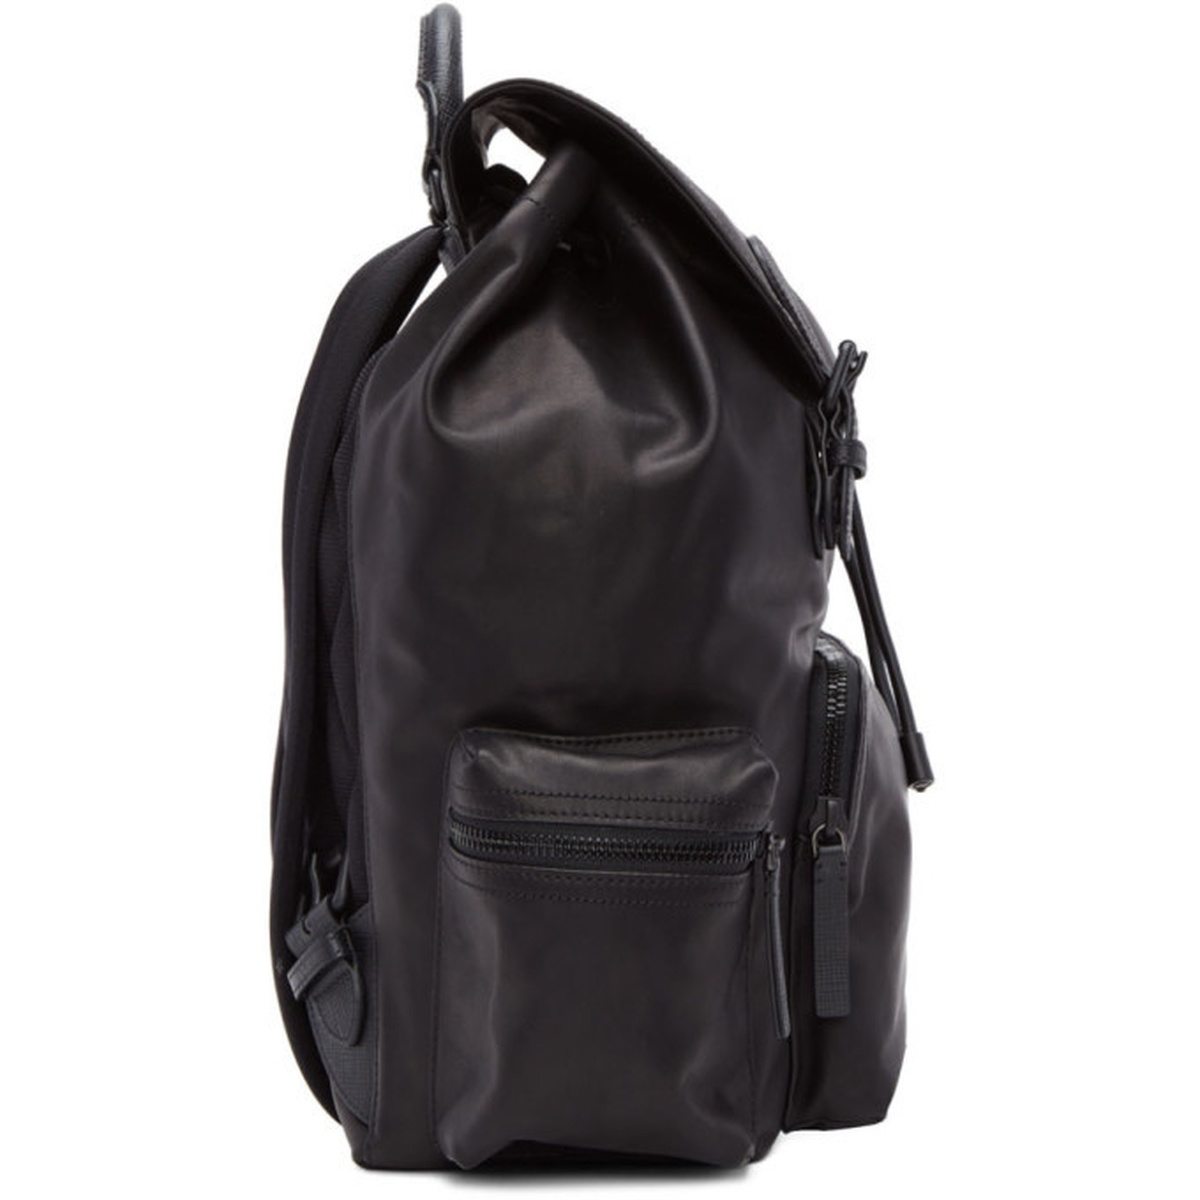 Burberry Black Large Leather Rucksack Burberry